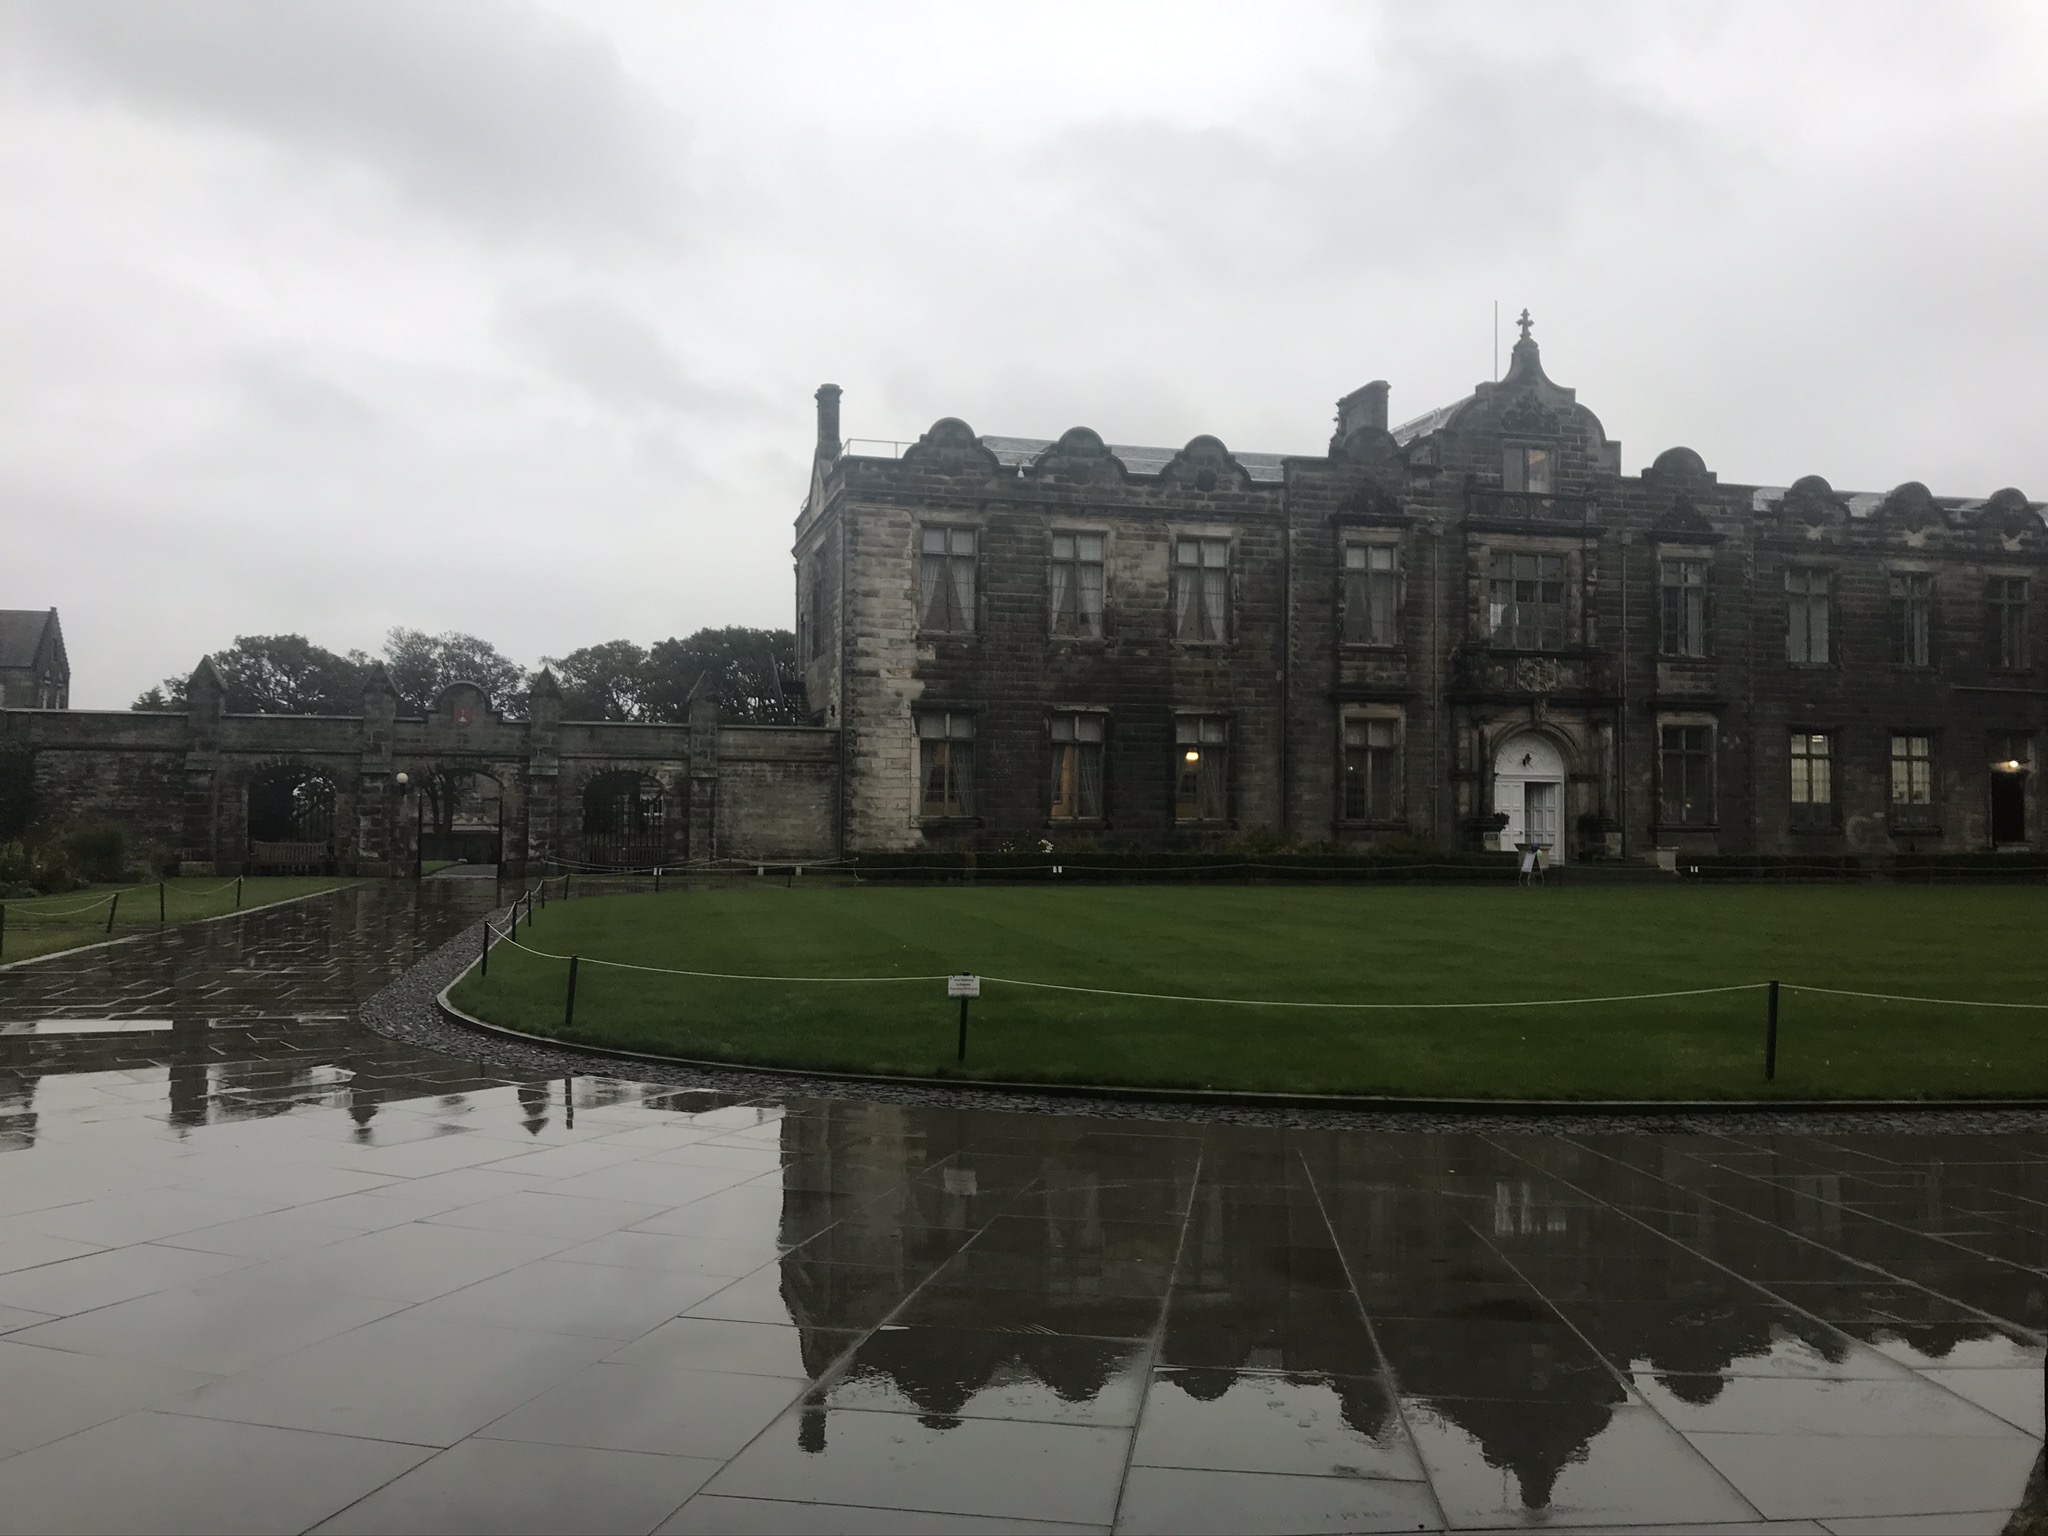 5 Day Weekend? My St Andrews Schedule - The William & Mary Blogs